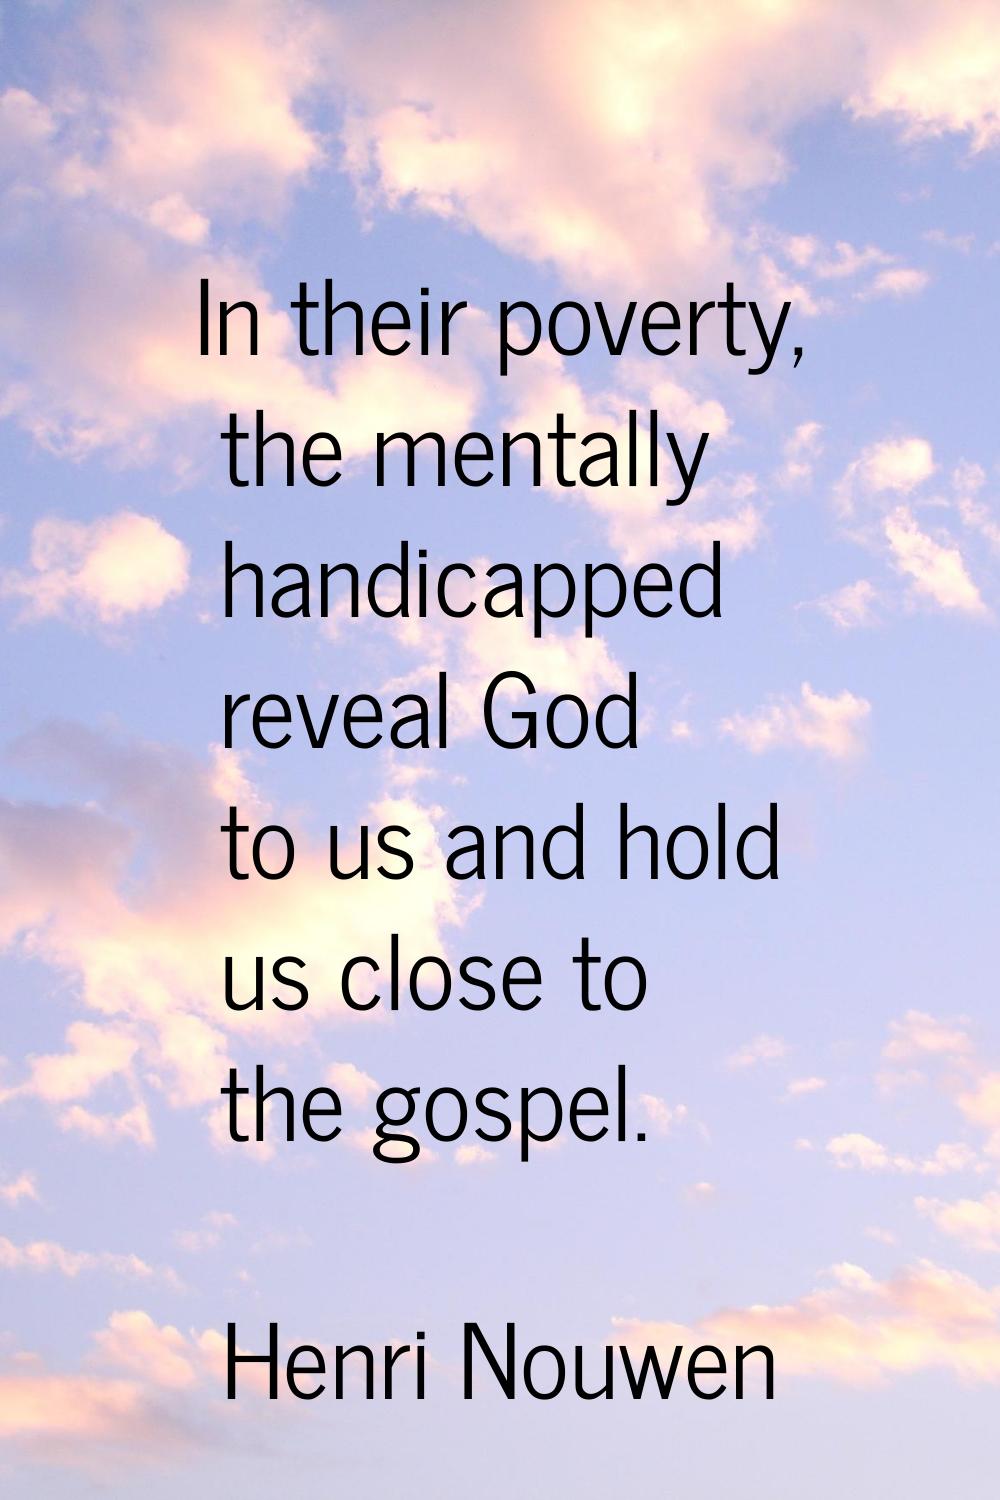 In their poverty, the mentally handicapped reveal God to us and hold us close to the gospel.